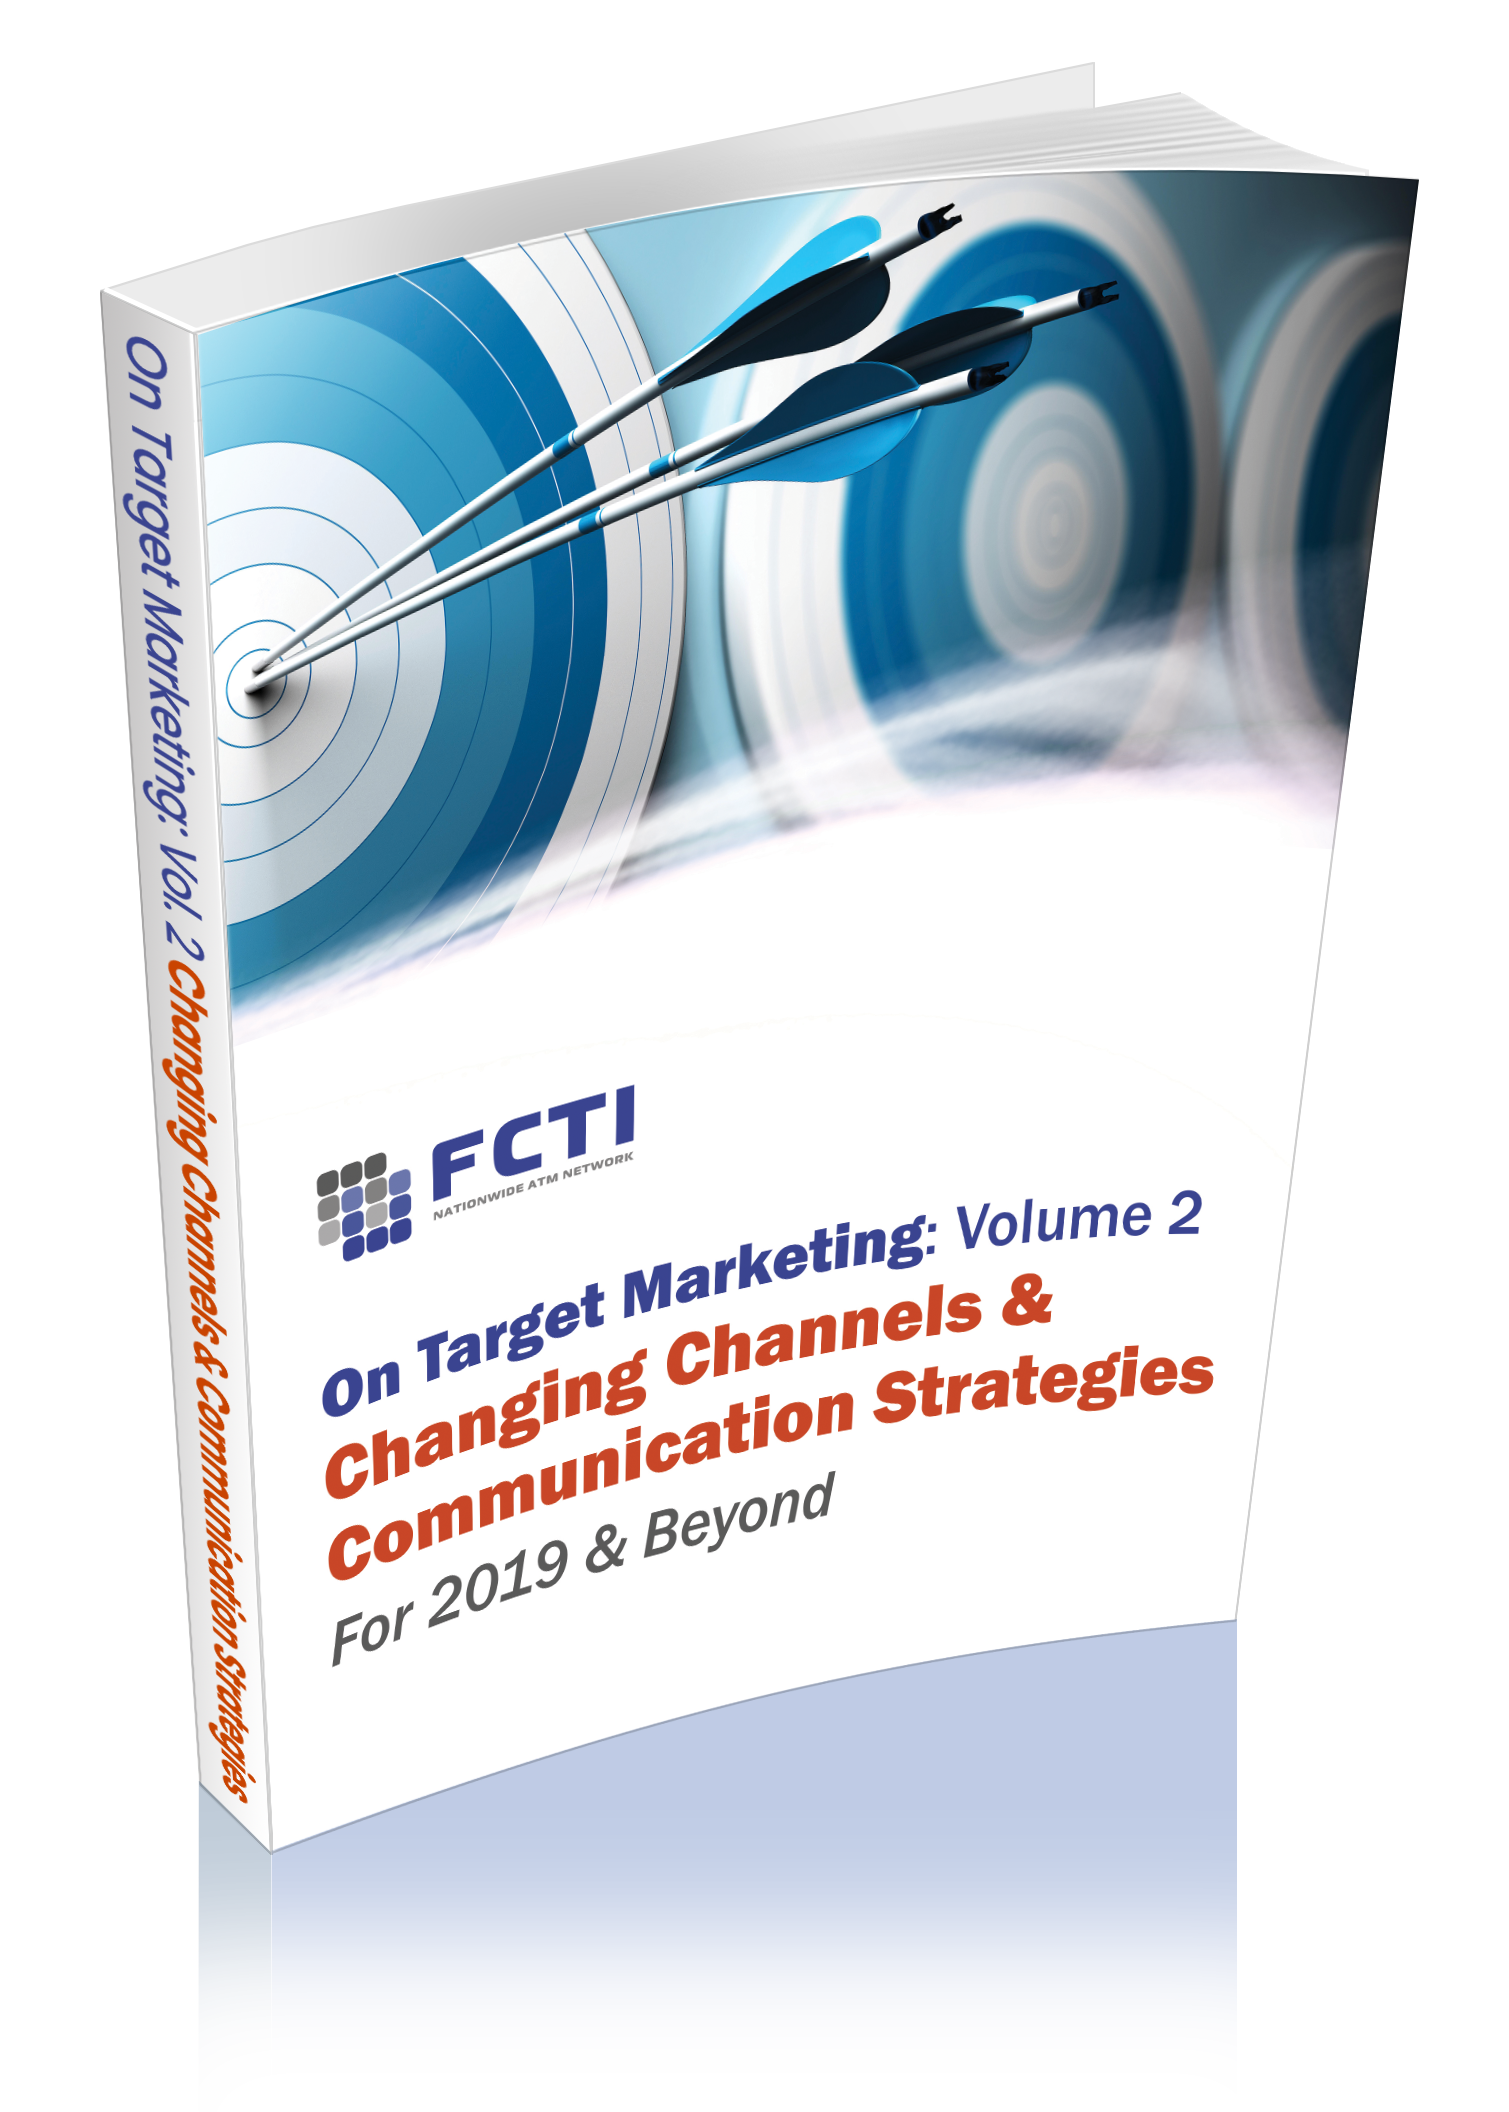 FREE White Paper - On Target Marketing for FIs Volume 2